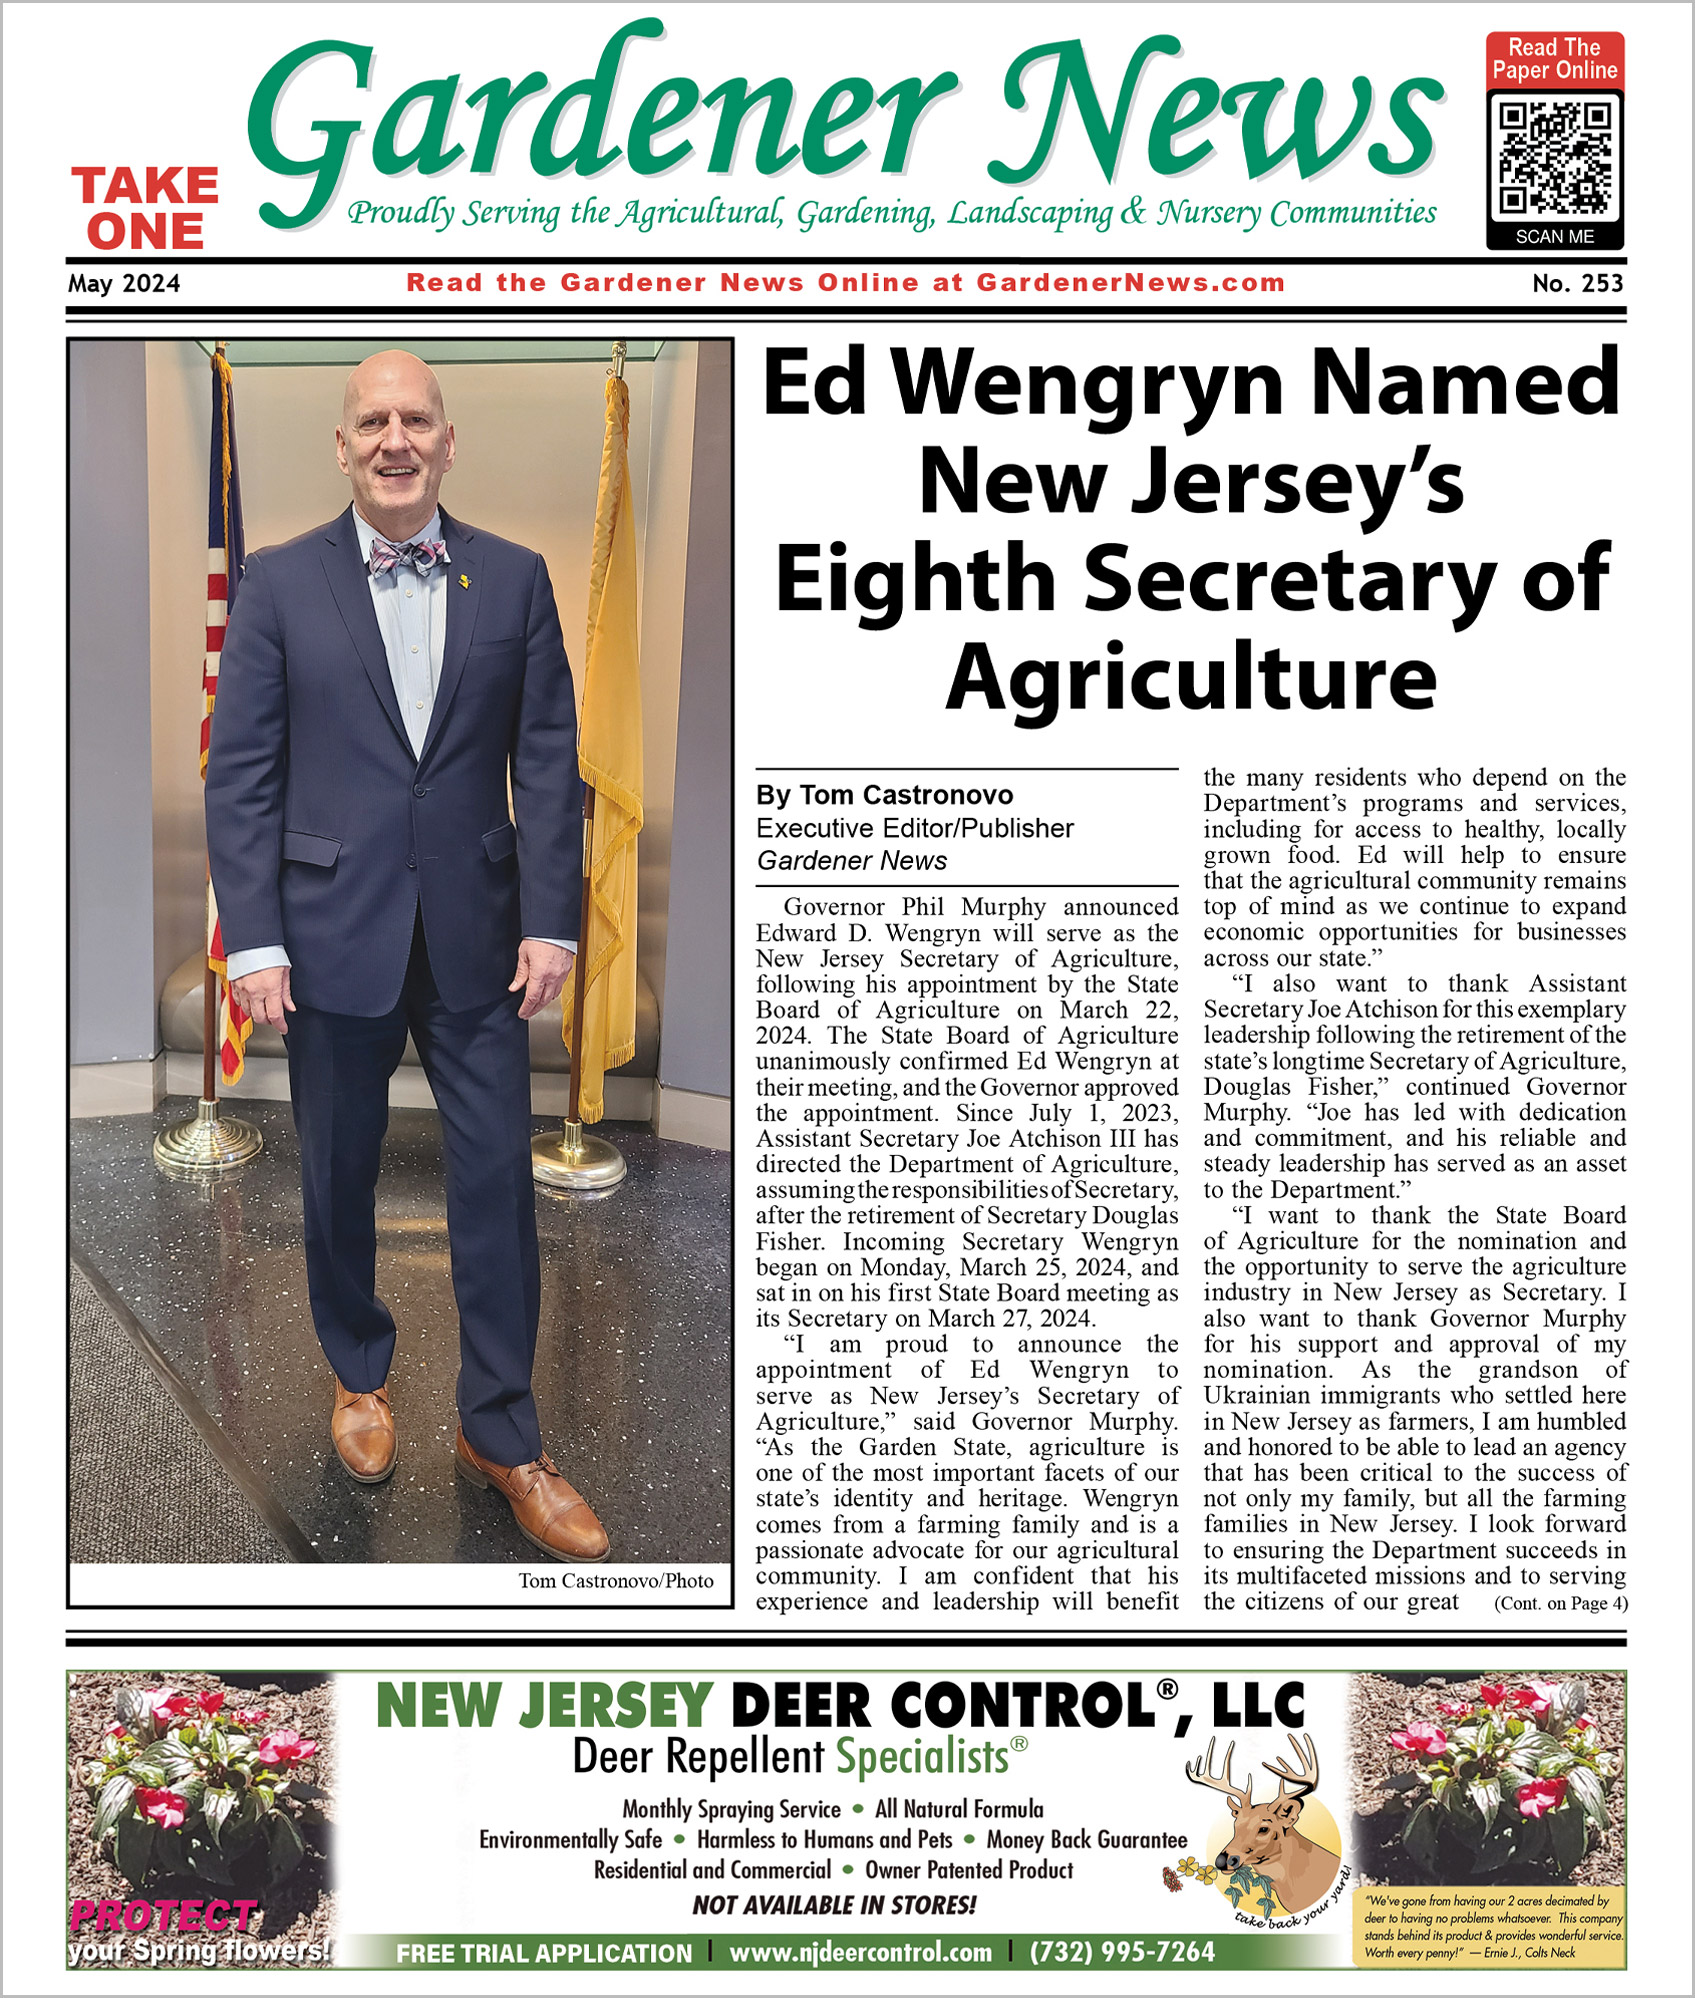 The May 2024 issue of the Gardener News